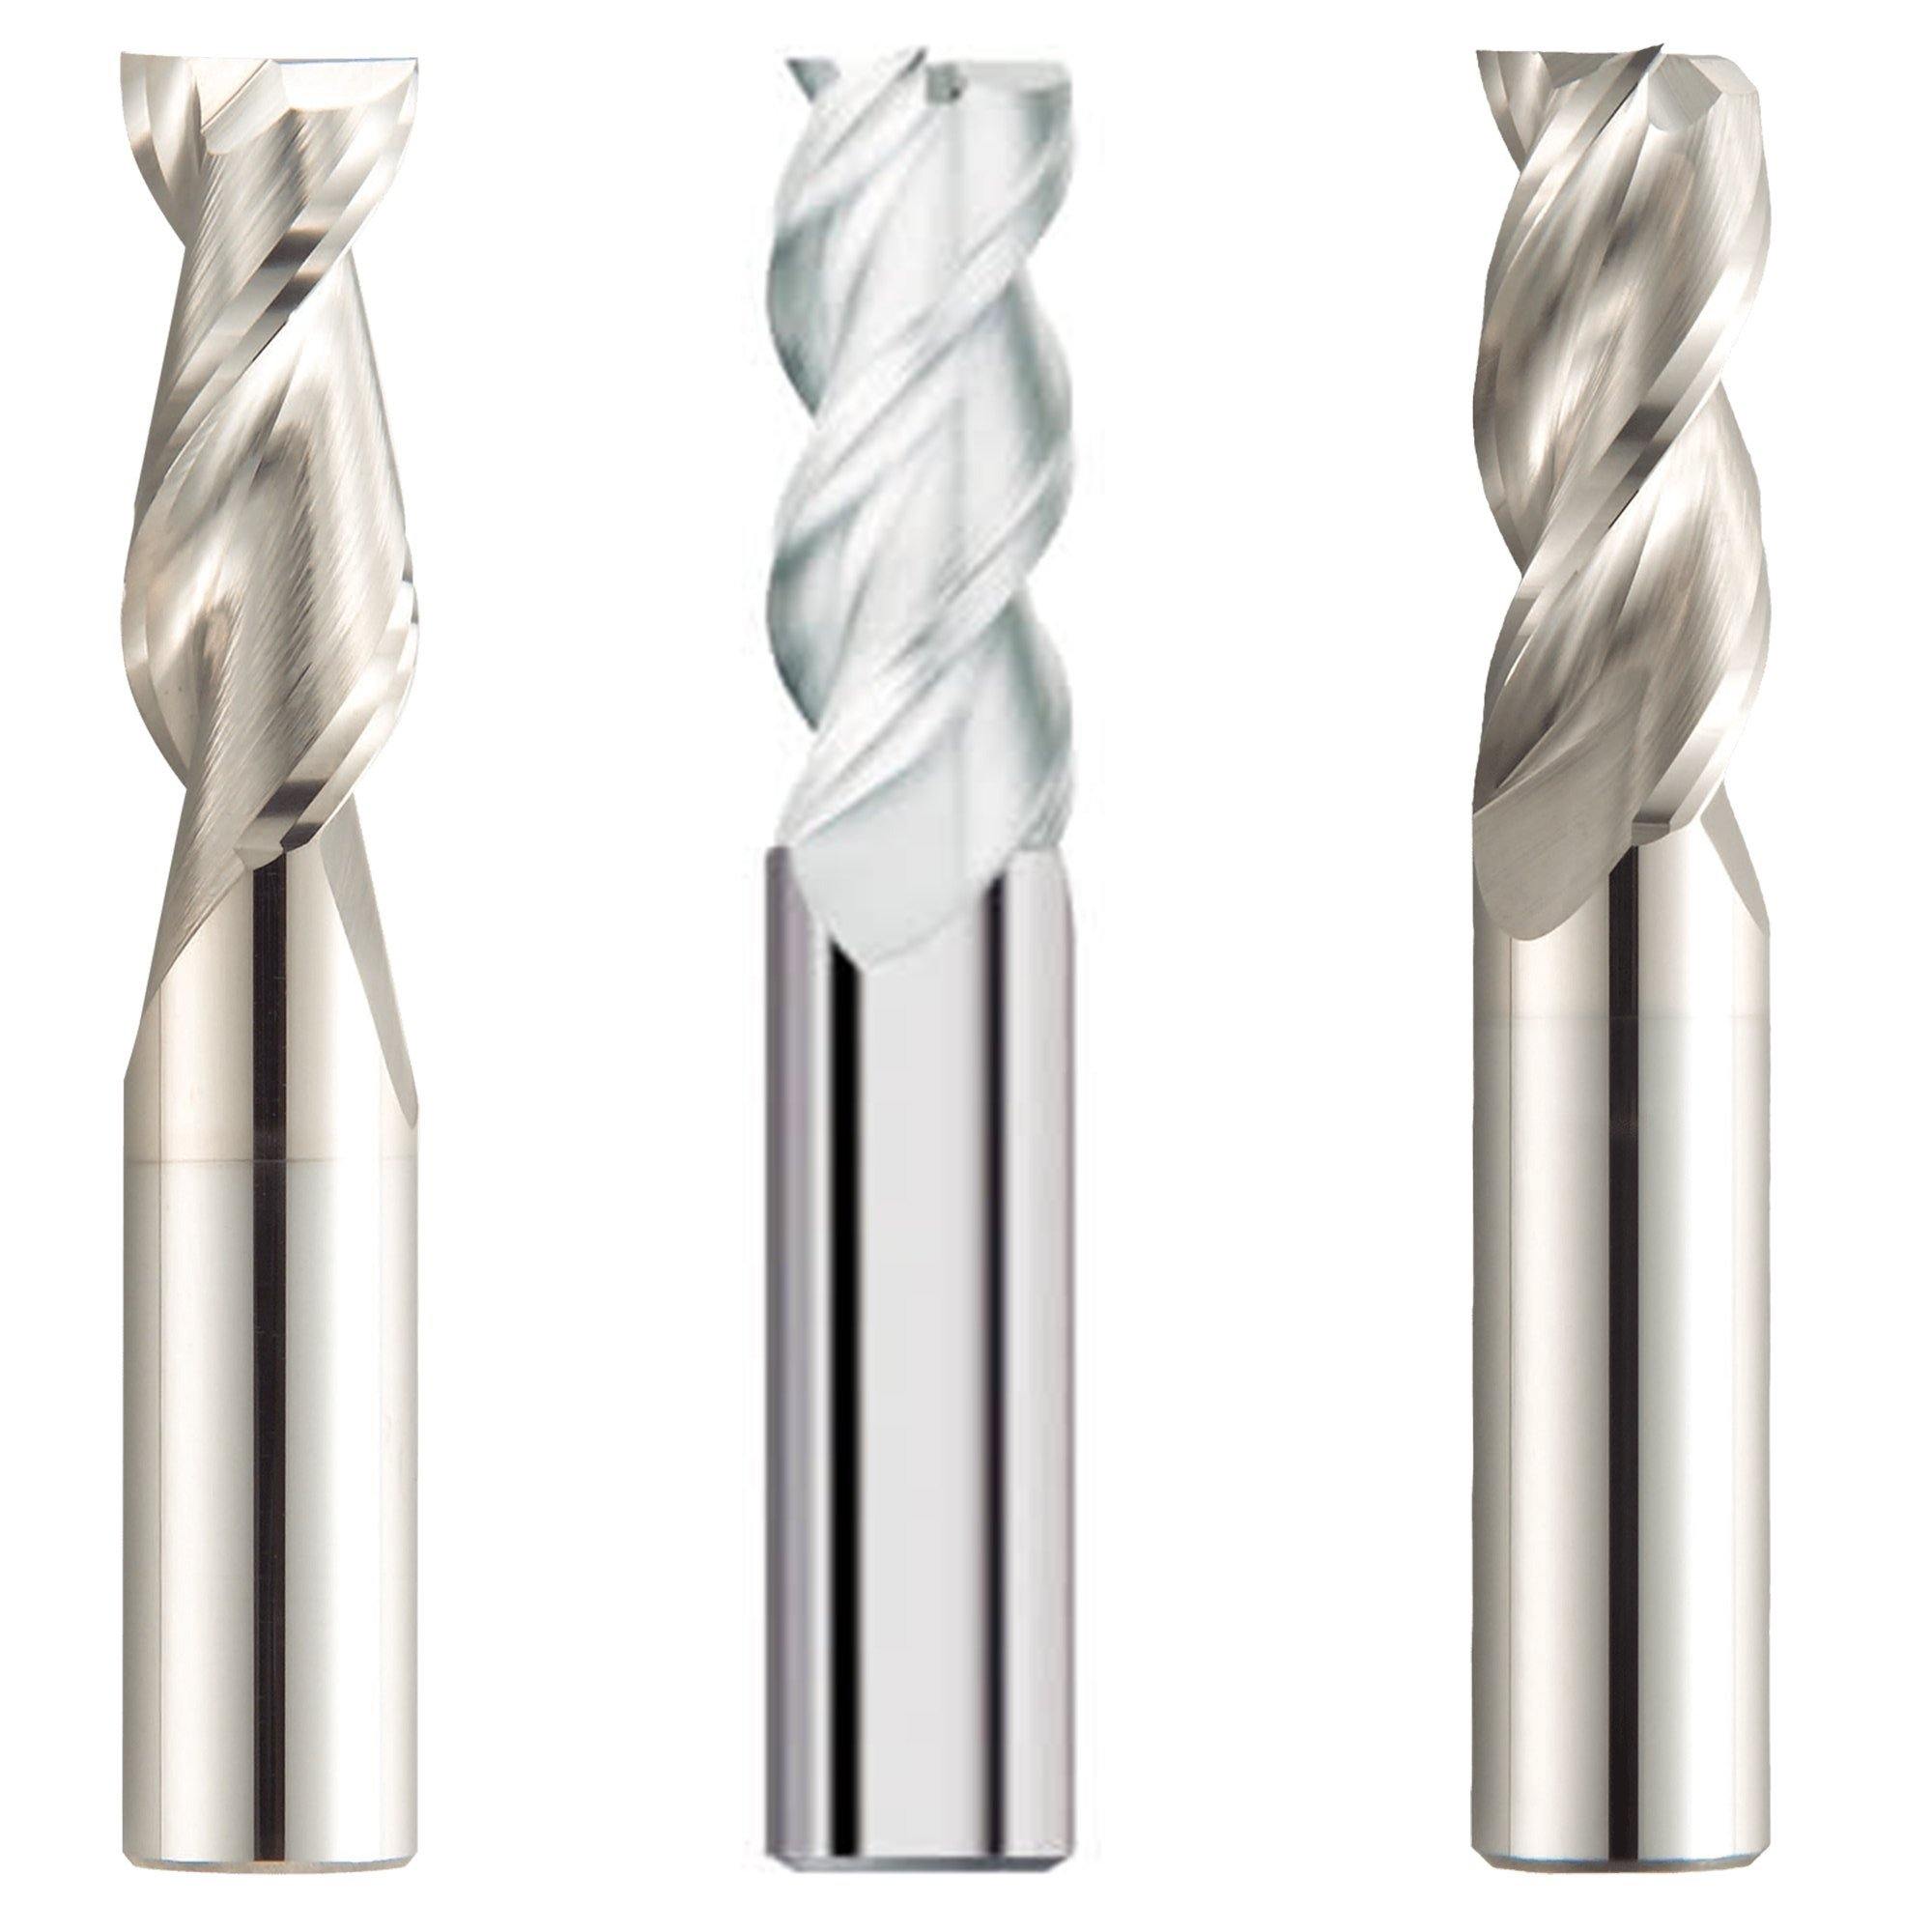 (3 Pack) 1" x 2" x 4" Aluminum HP Carbide End Mills - The End Mill Store 